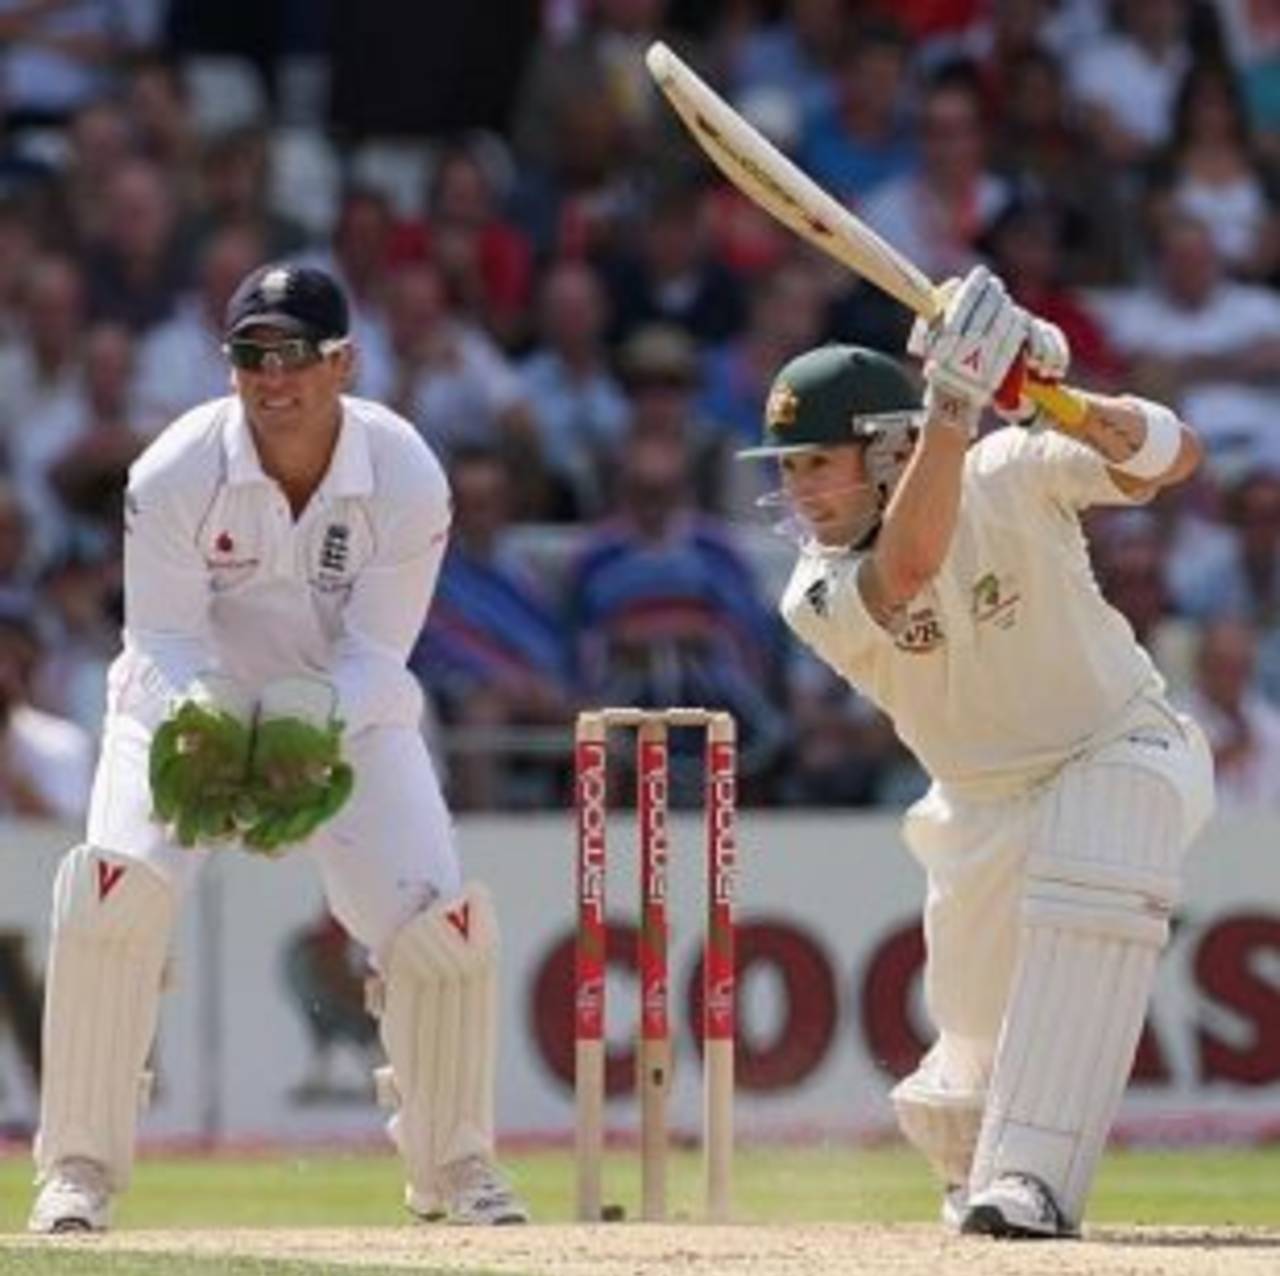 Michael Clarke drives during his innings of 93, England v Australia, 4th Test, Headingley, 2nd day, August 8, 2009